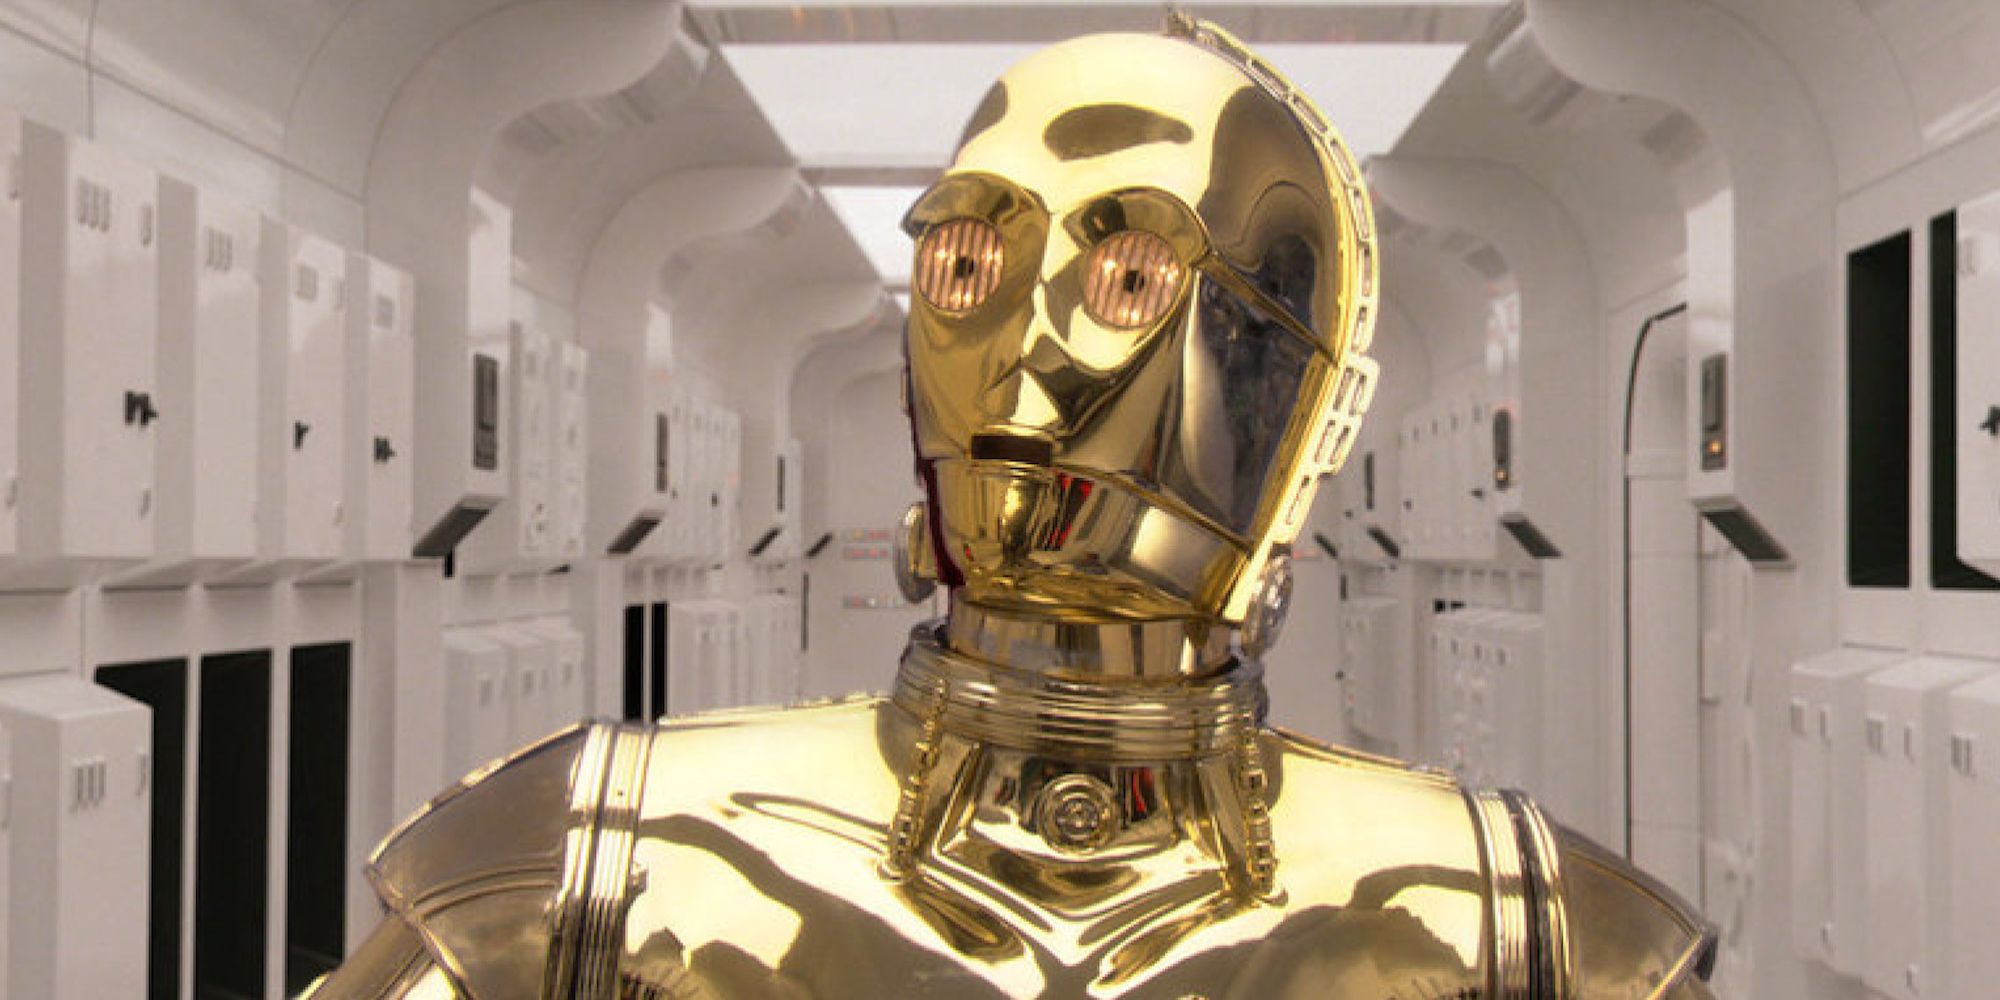 C3PO, played by Anthony Daniels, walks down a hallway on a ship in Star Wars: A New Hope